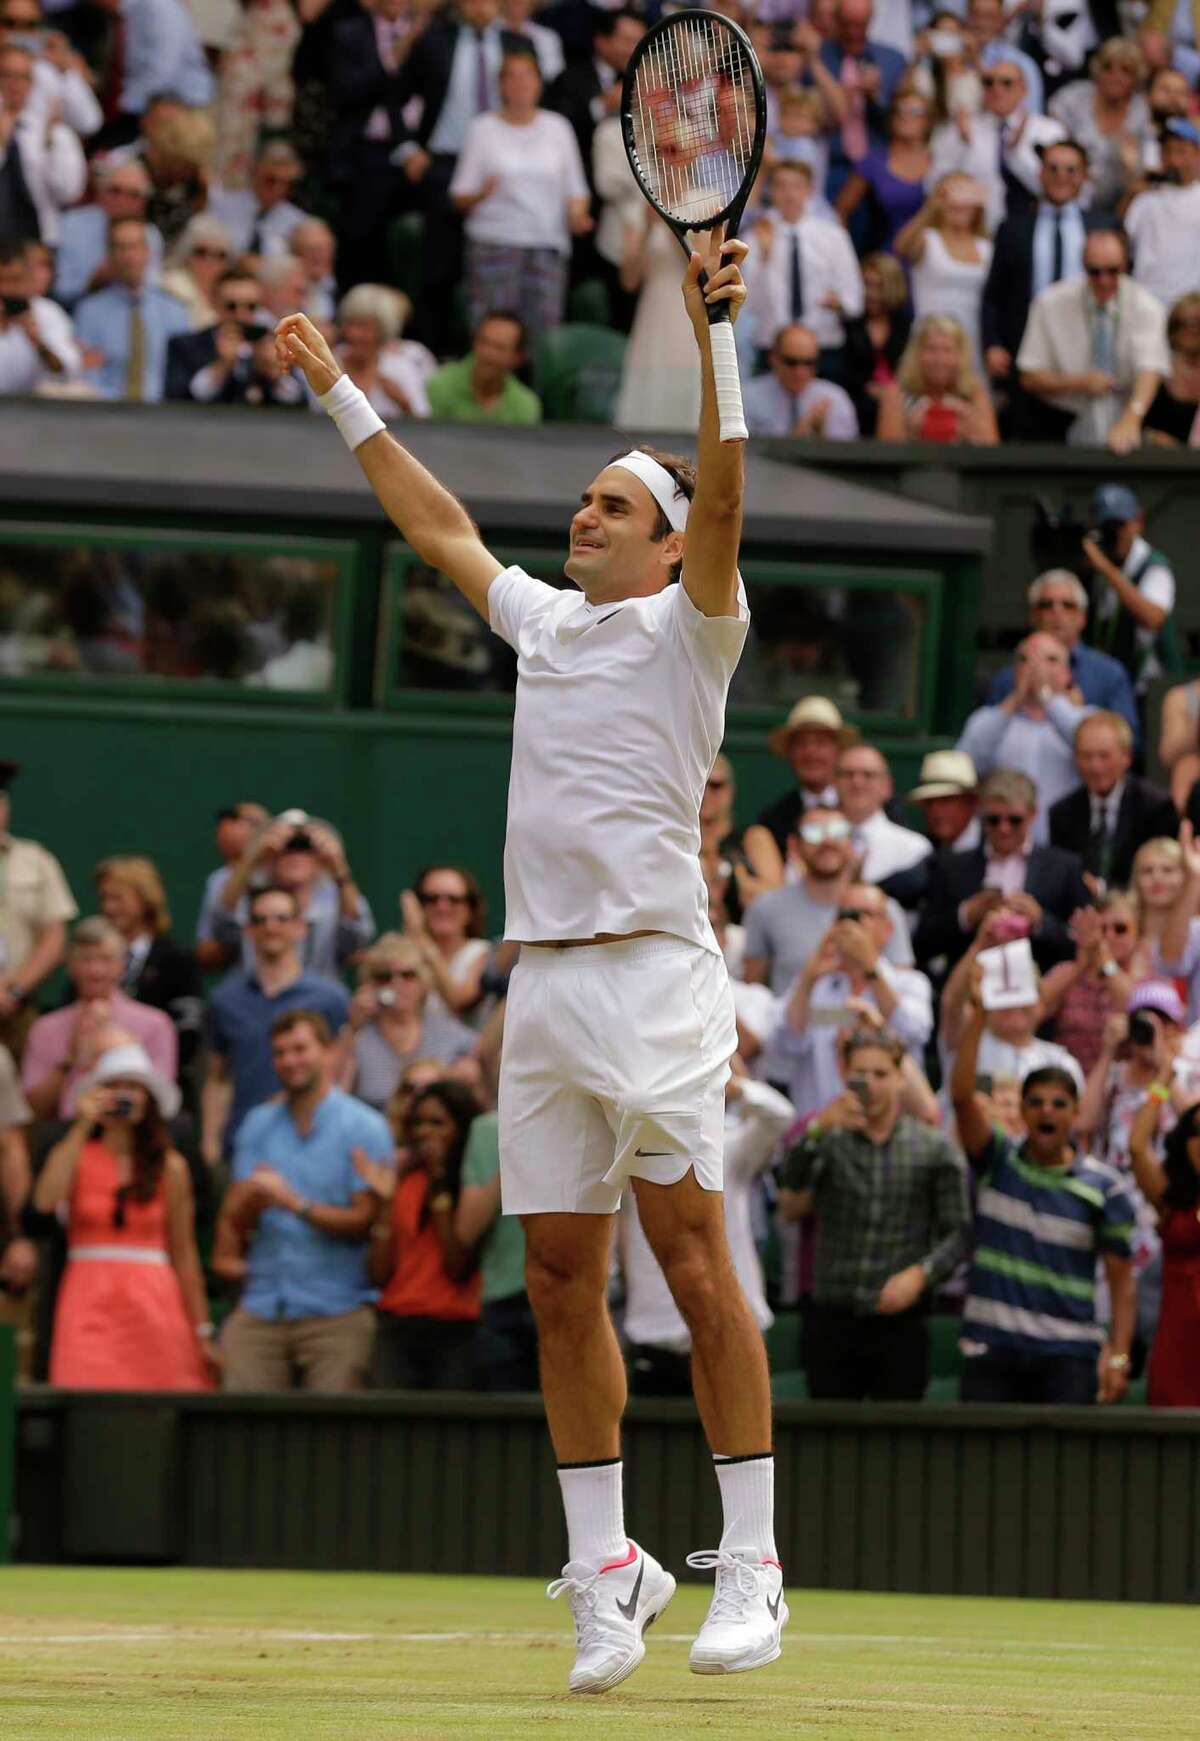 Switzerland's Roger Federer celebrates after defeating Croatia's Marin Cilic to win the Men's Singles final match on day thirteen at the Wimbledon Tennis Championships in London Sunday, July 16, 2017. (AP Photo/Alastair Grant)